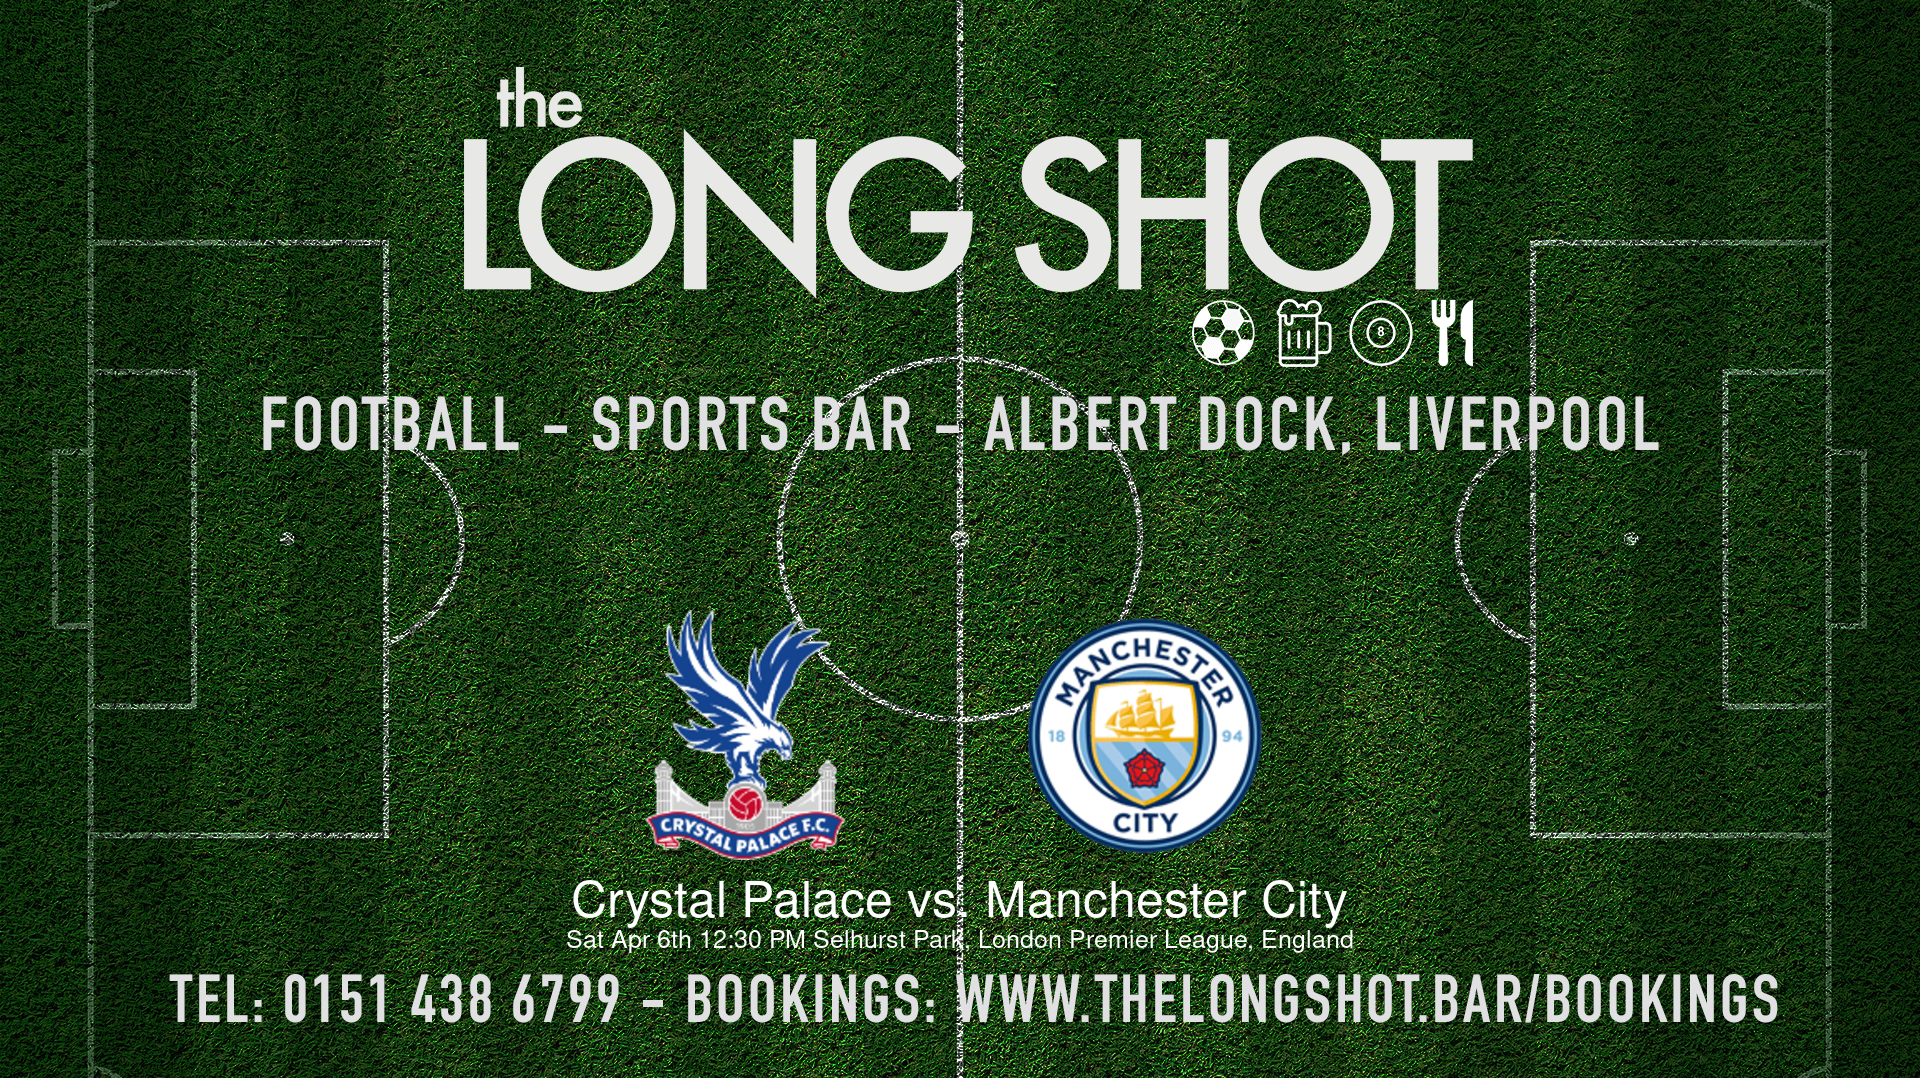 Event image - Crystal Palace vs. Manchester City